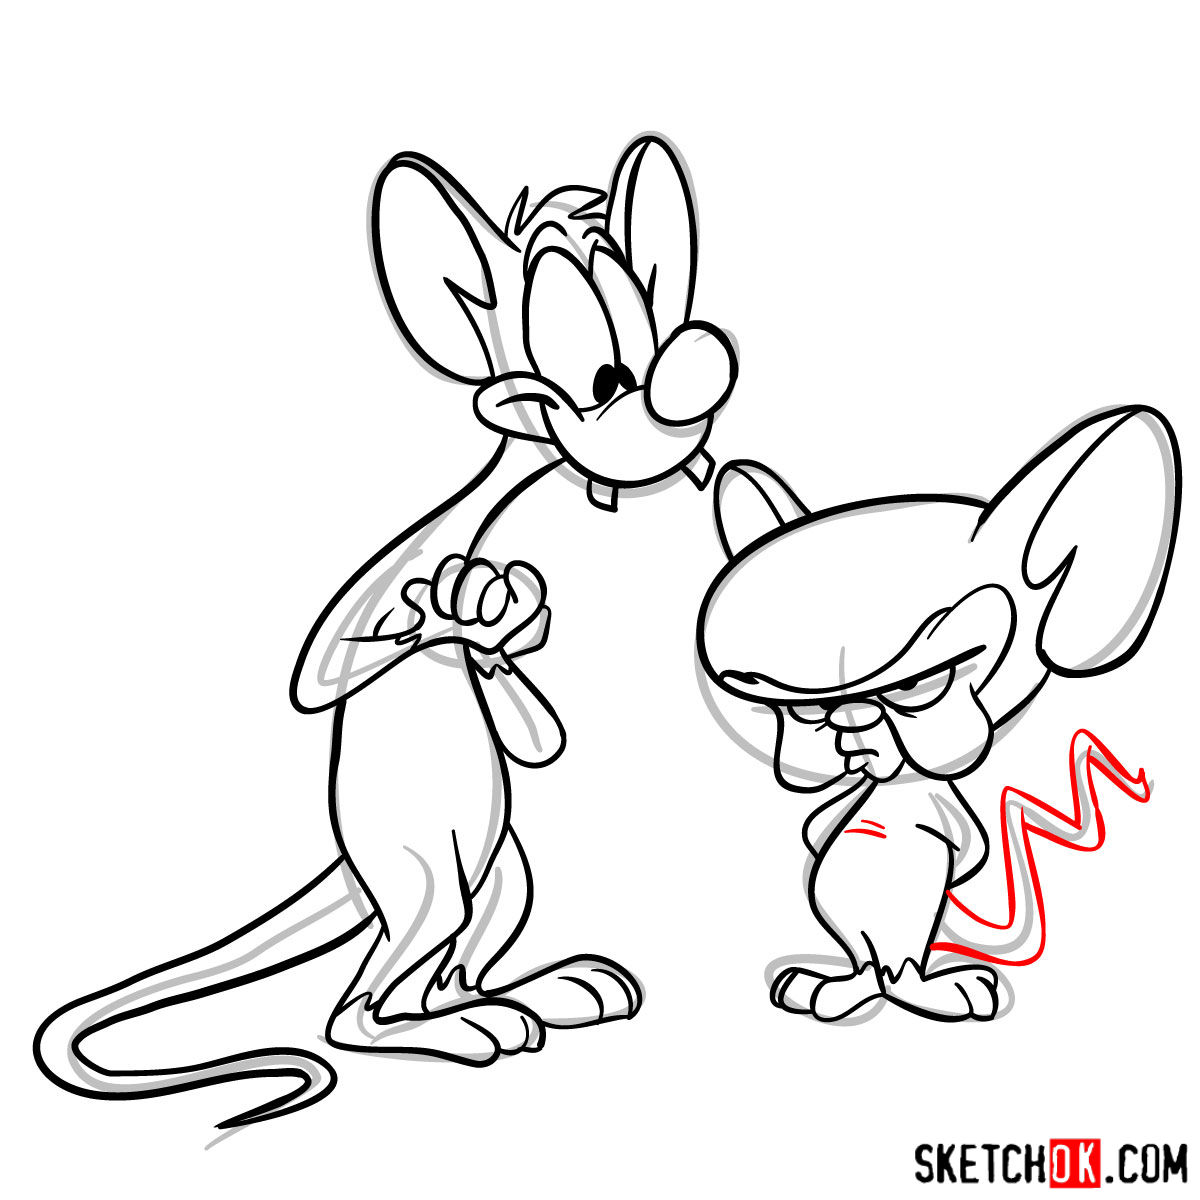 How to draw Pinky and the Brain together - step 15